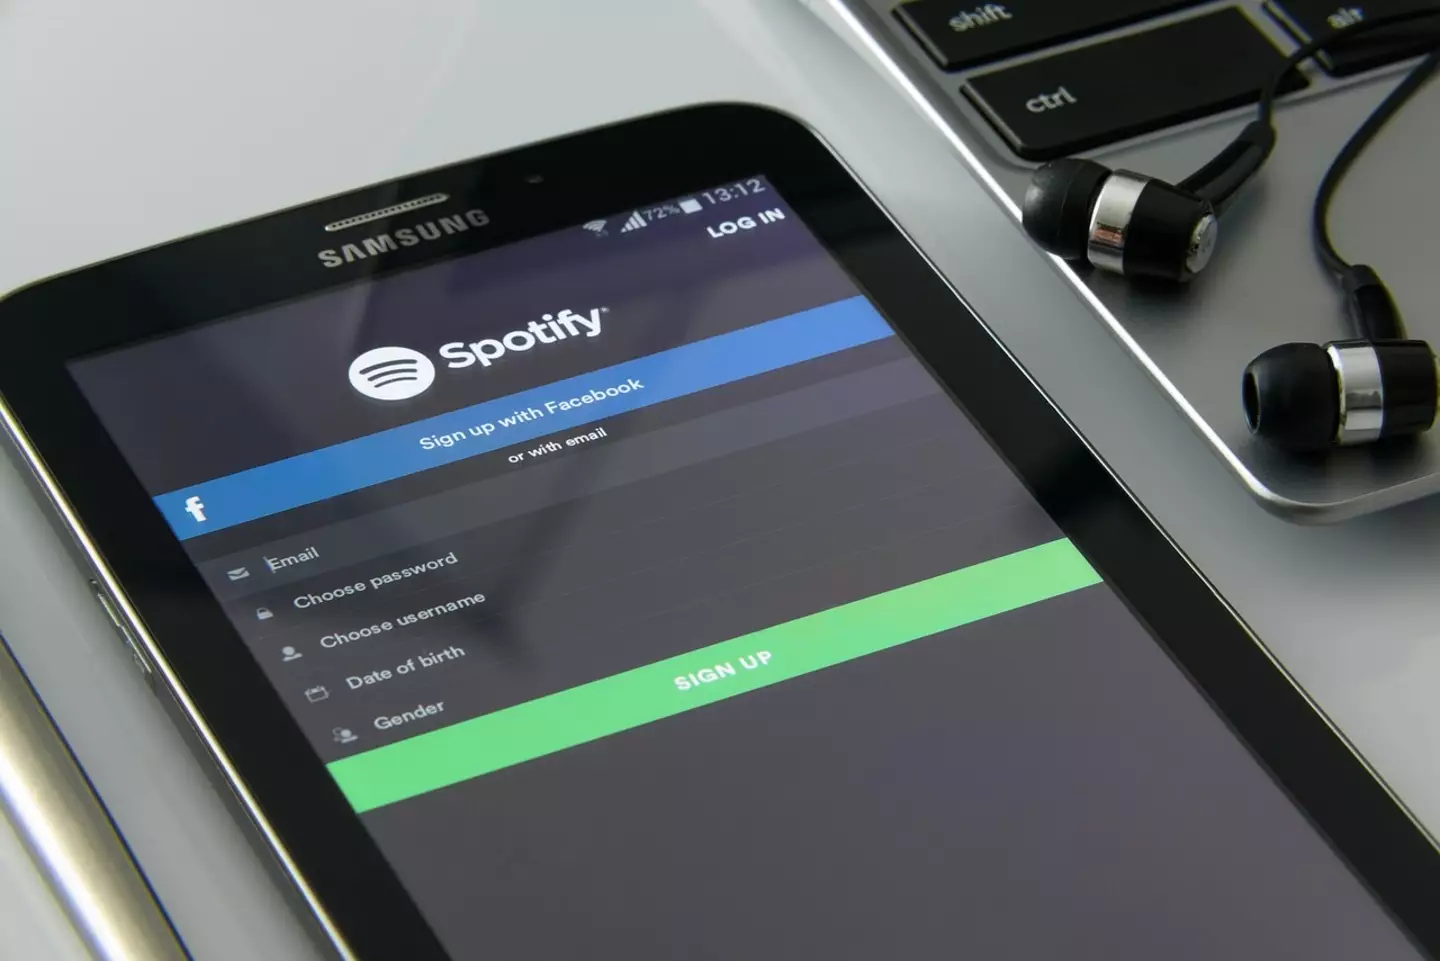 Spotify is a leading digital music, podcast and video service.